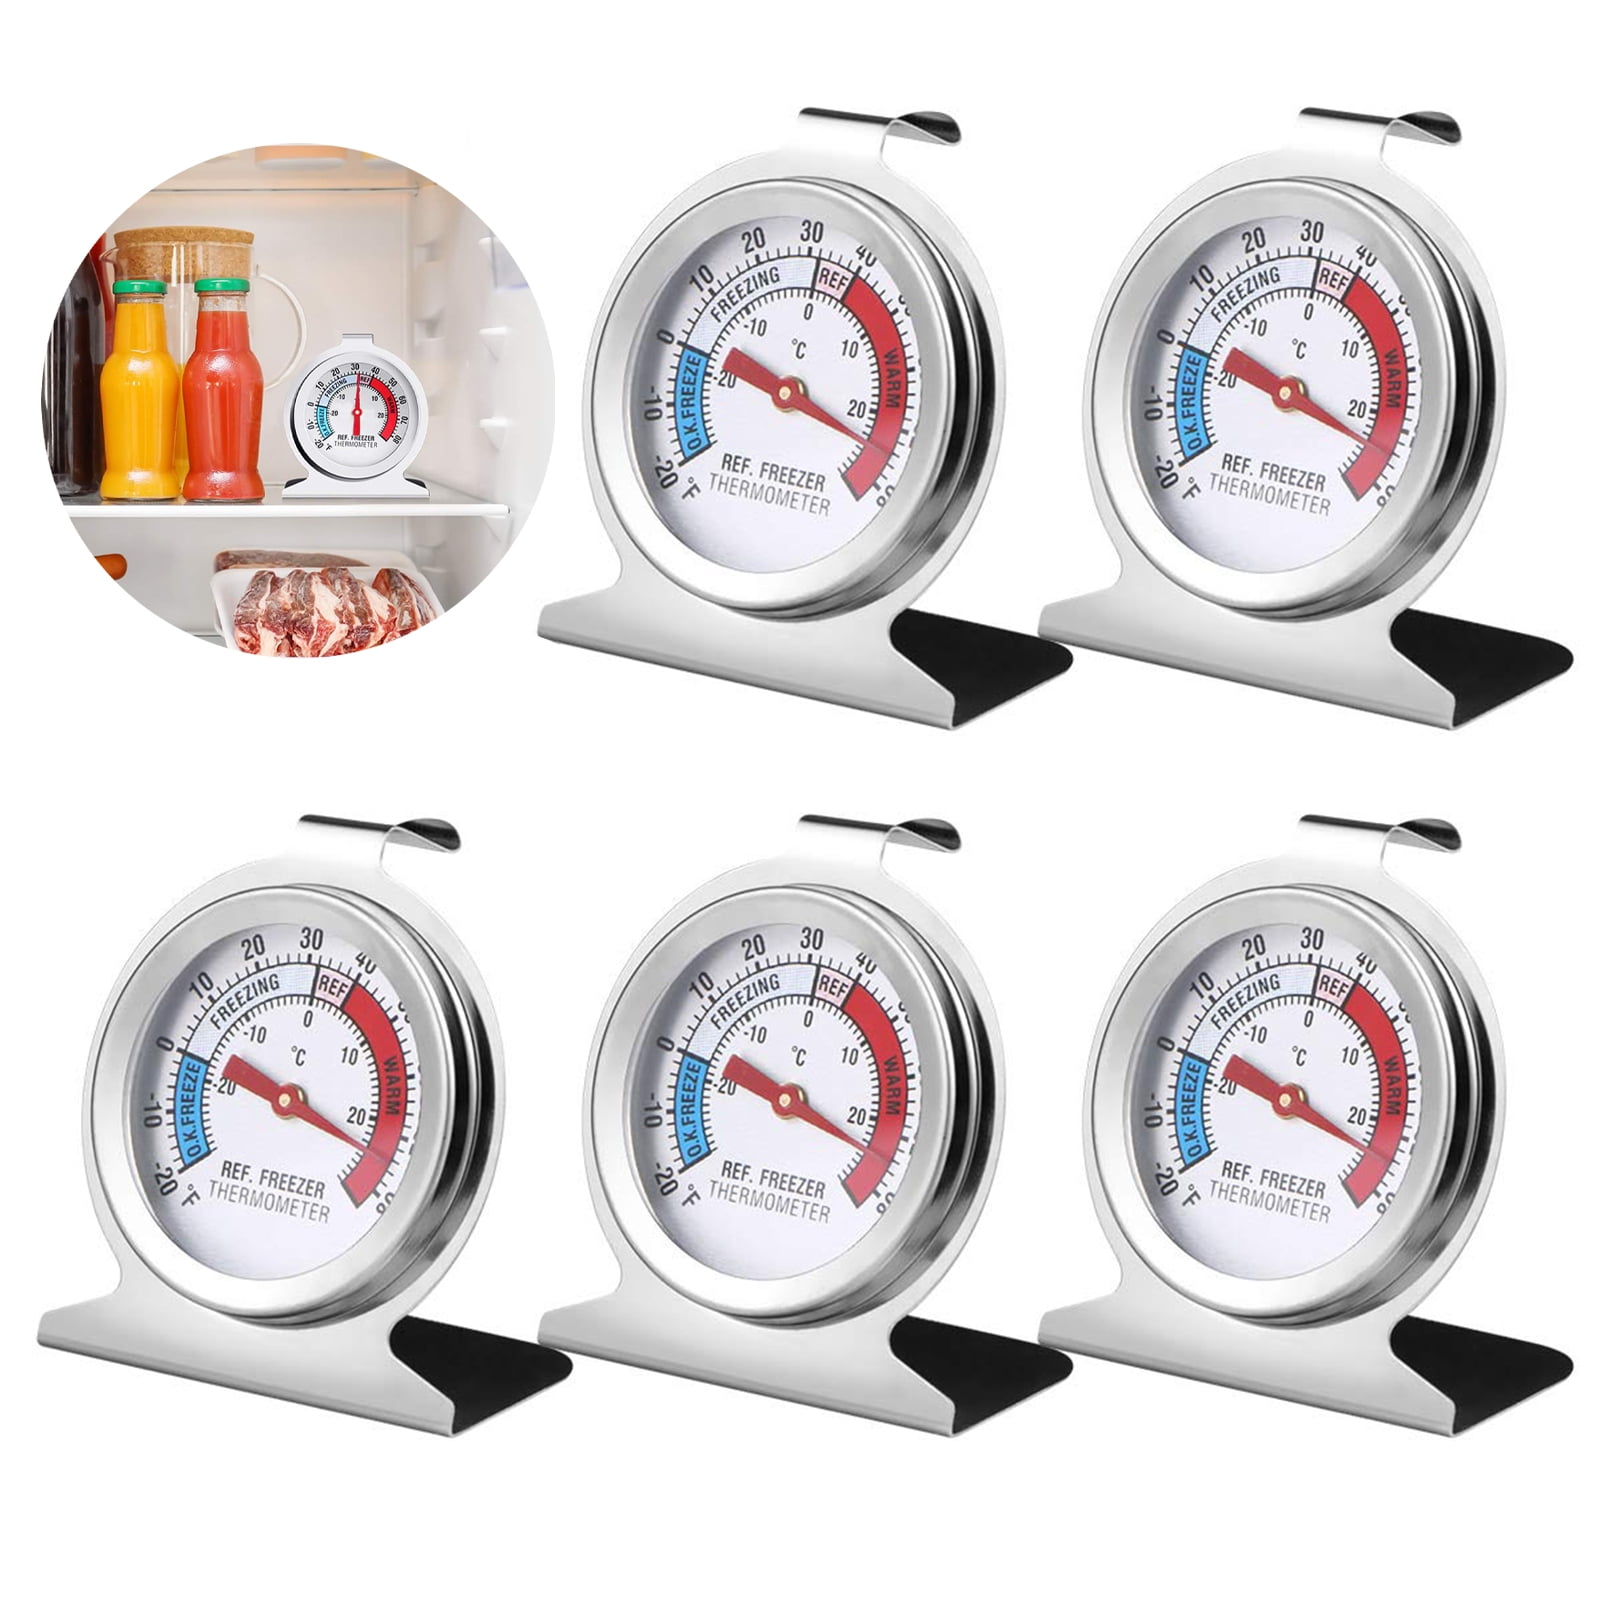 Promo 4 Pack Refrigerator Thermometer, Classic Fridge Thermometer